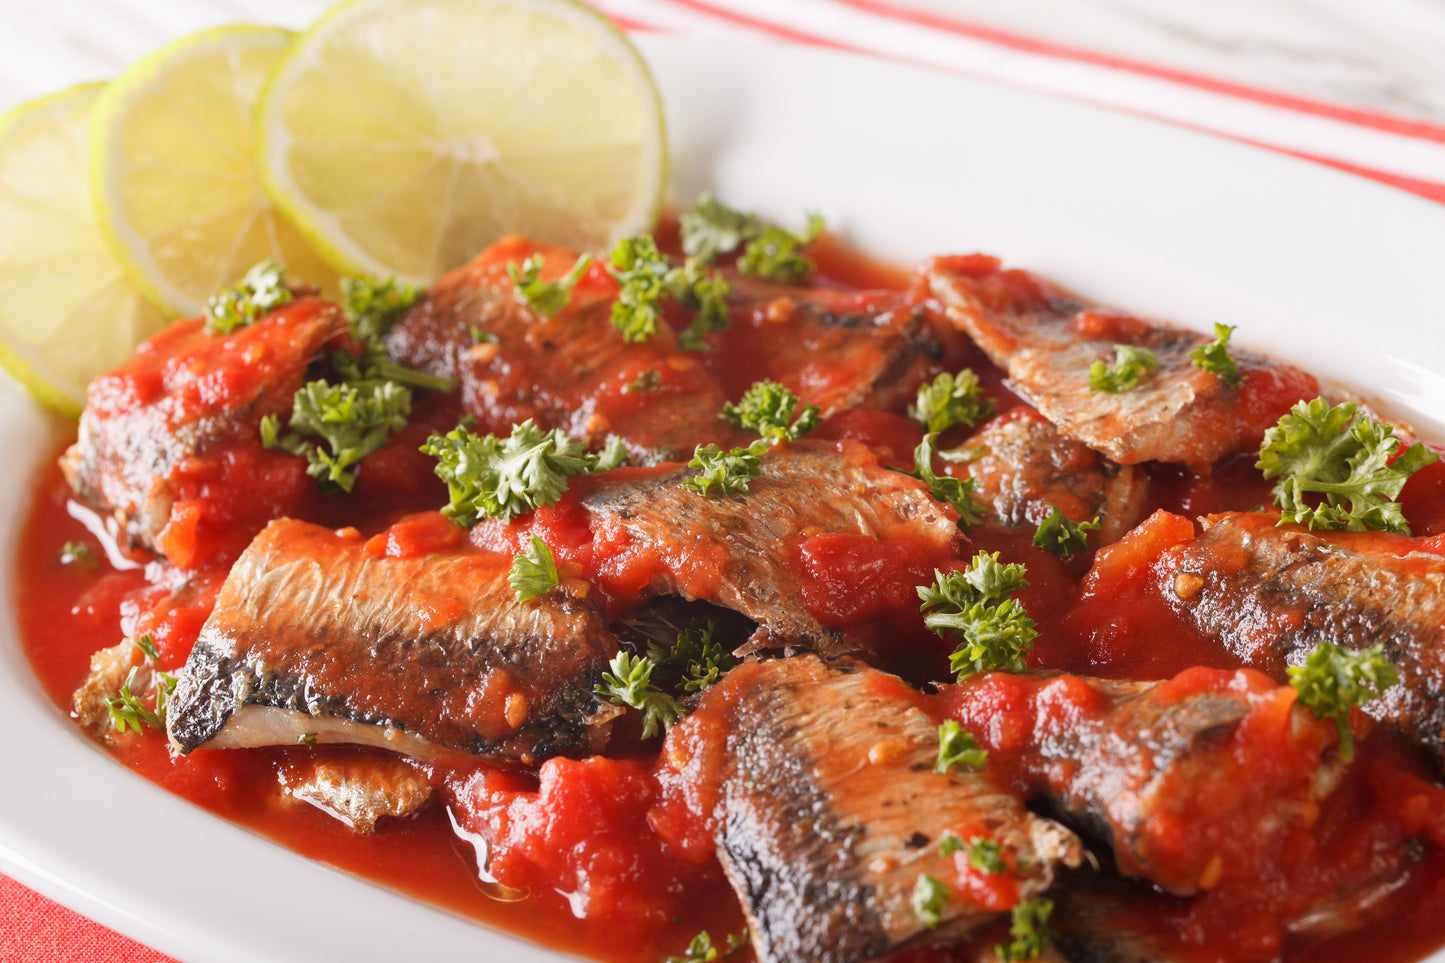 Sardines in spicy tomato sauce on white plate with lemon